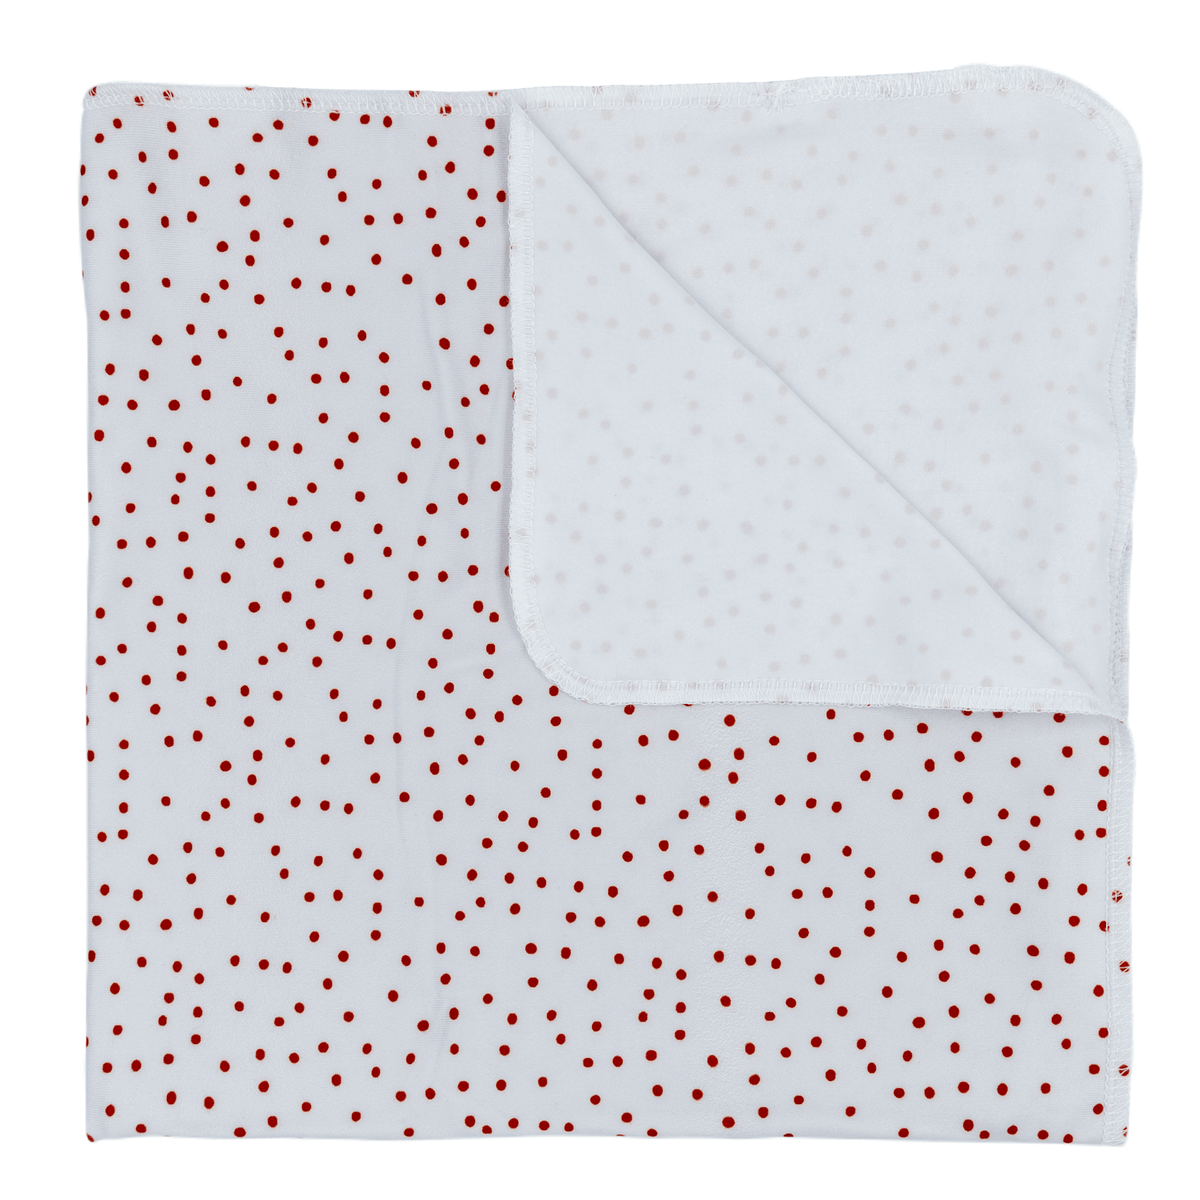 Imagine Baby Stretchy Swaddle Blanket Polka Party